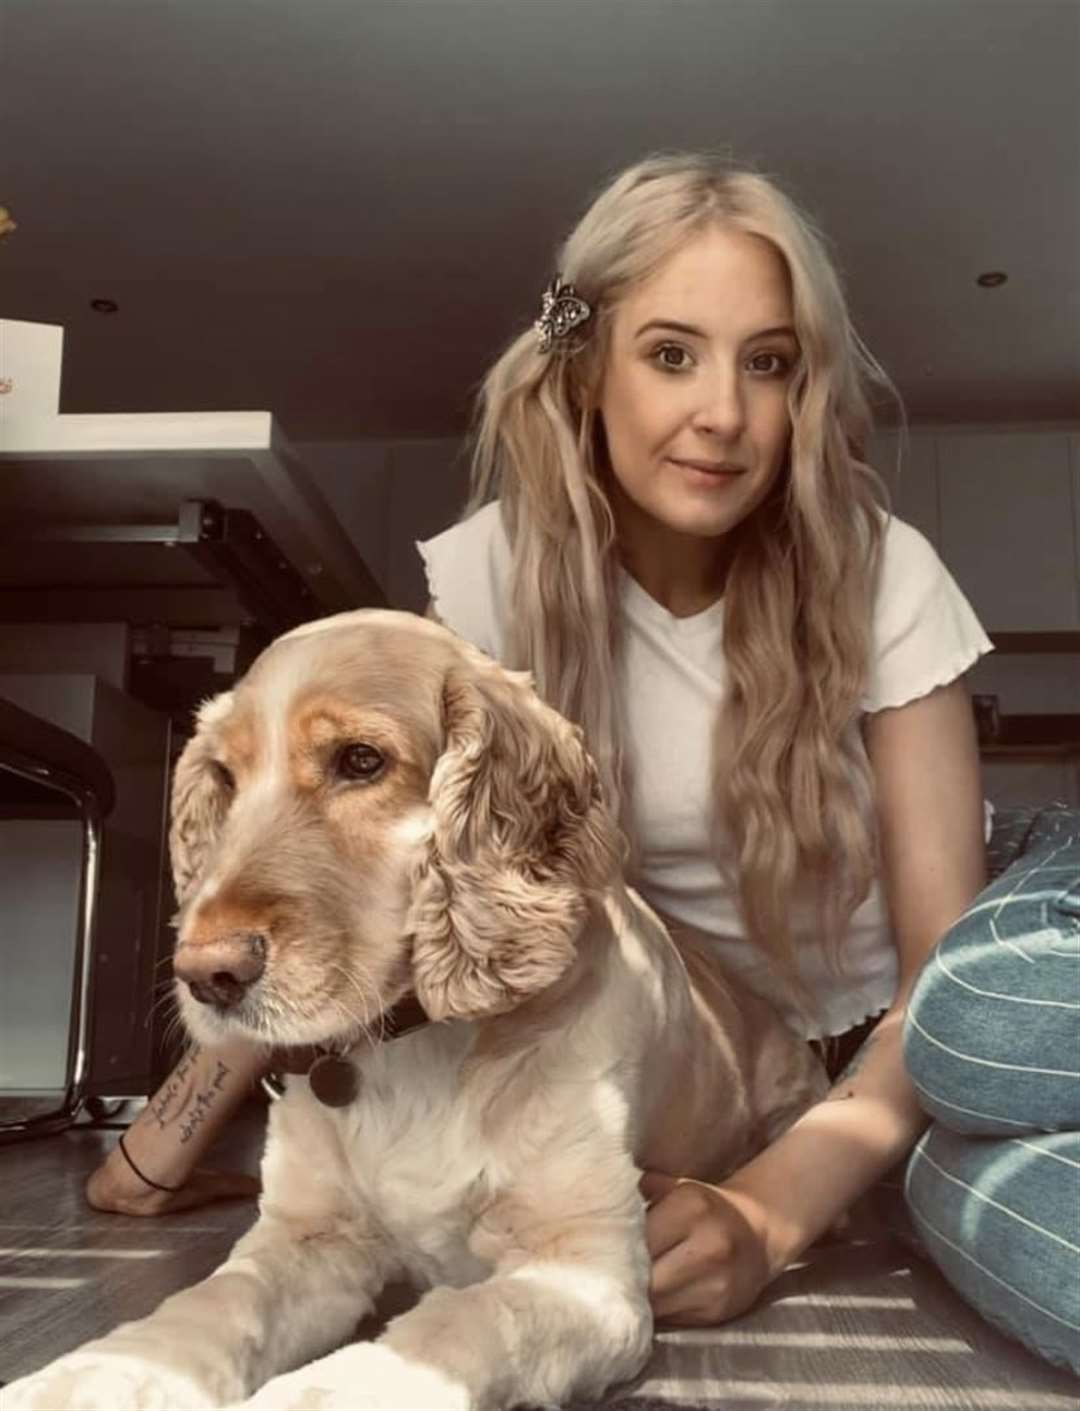 Alana with her inspiration for the business name, her cocker spaniel Buddy.